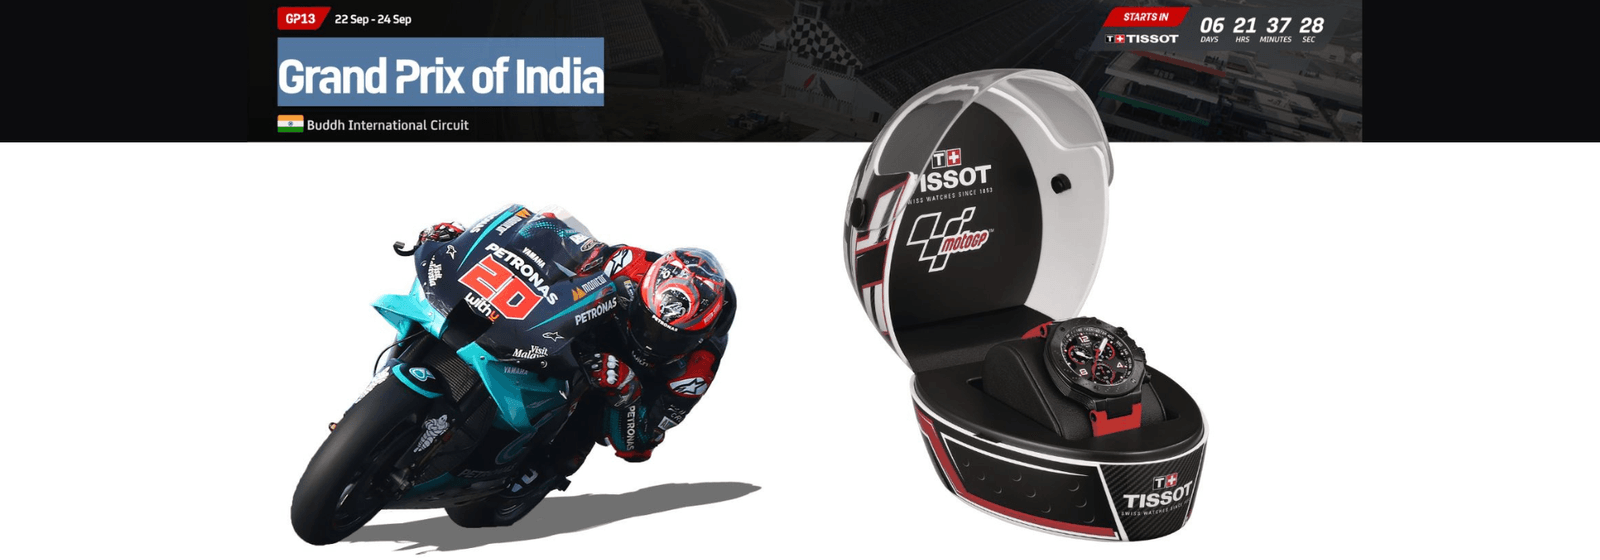 Celebrating The Grand Prix of India With The All New Tissot T-Race MotoGP Chronograph 2023 Limited Edition